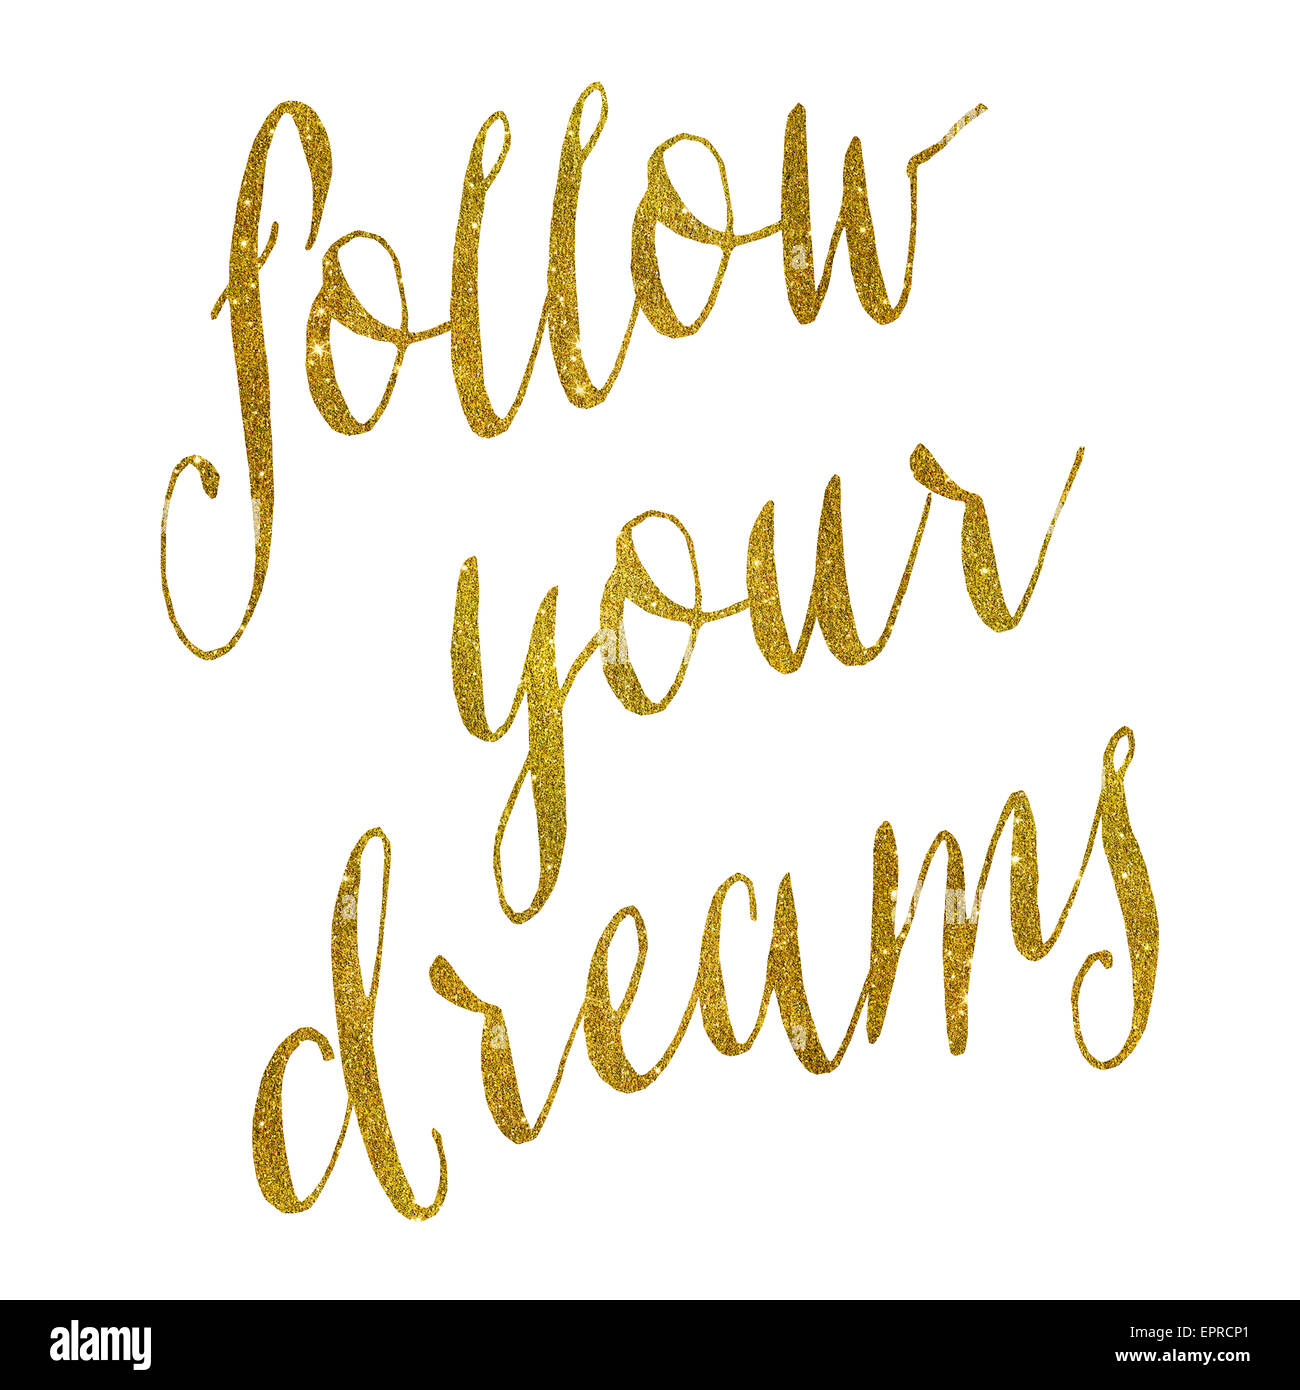 Follow Your Dreams Gold Faux Foil Metallic Glitter Quote Isolated on White Background Stock Photo